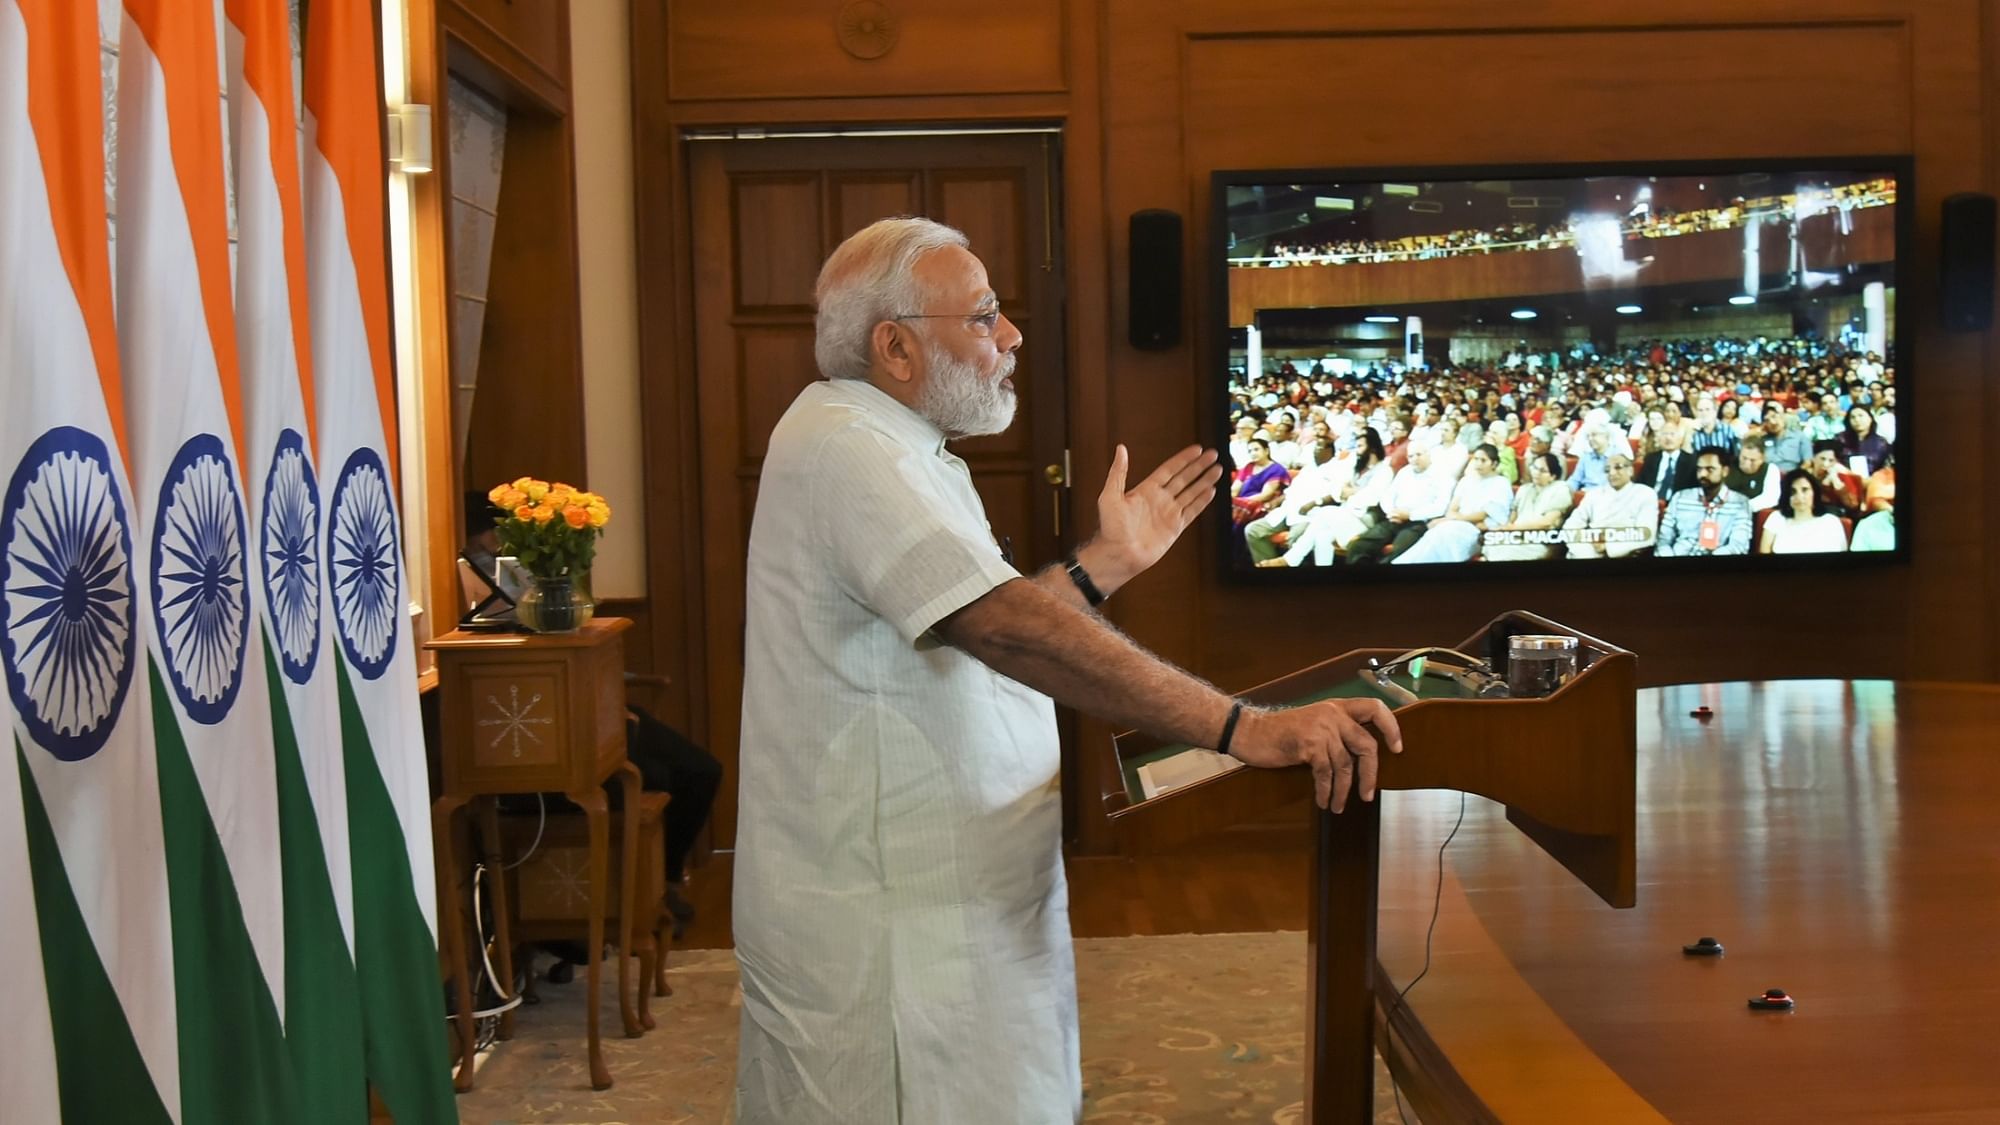 PM Modi speaks on climate change at SPIC MACAY conference in Delhi. (Photo: IANS)